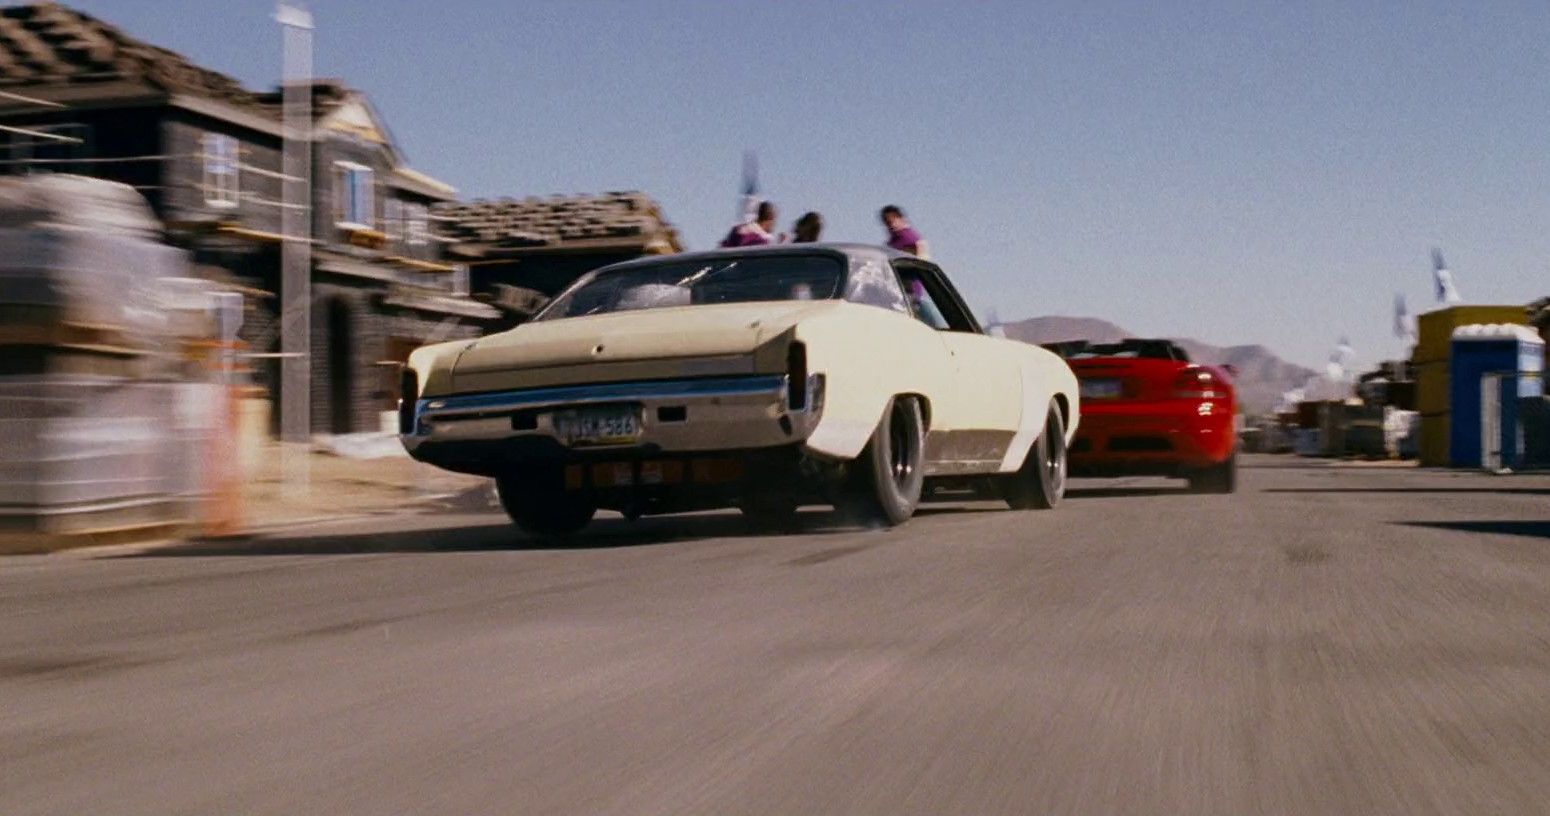 Here's What Happened To The 1971 Monte Carlo From The Fast And The Furious